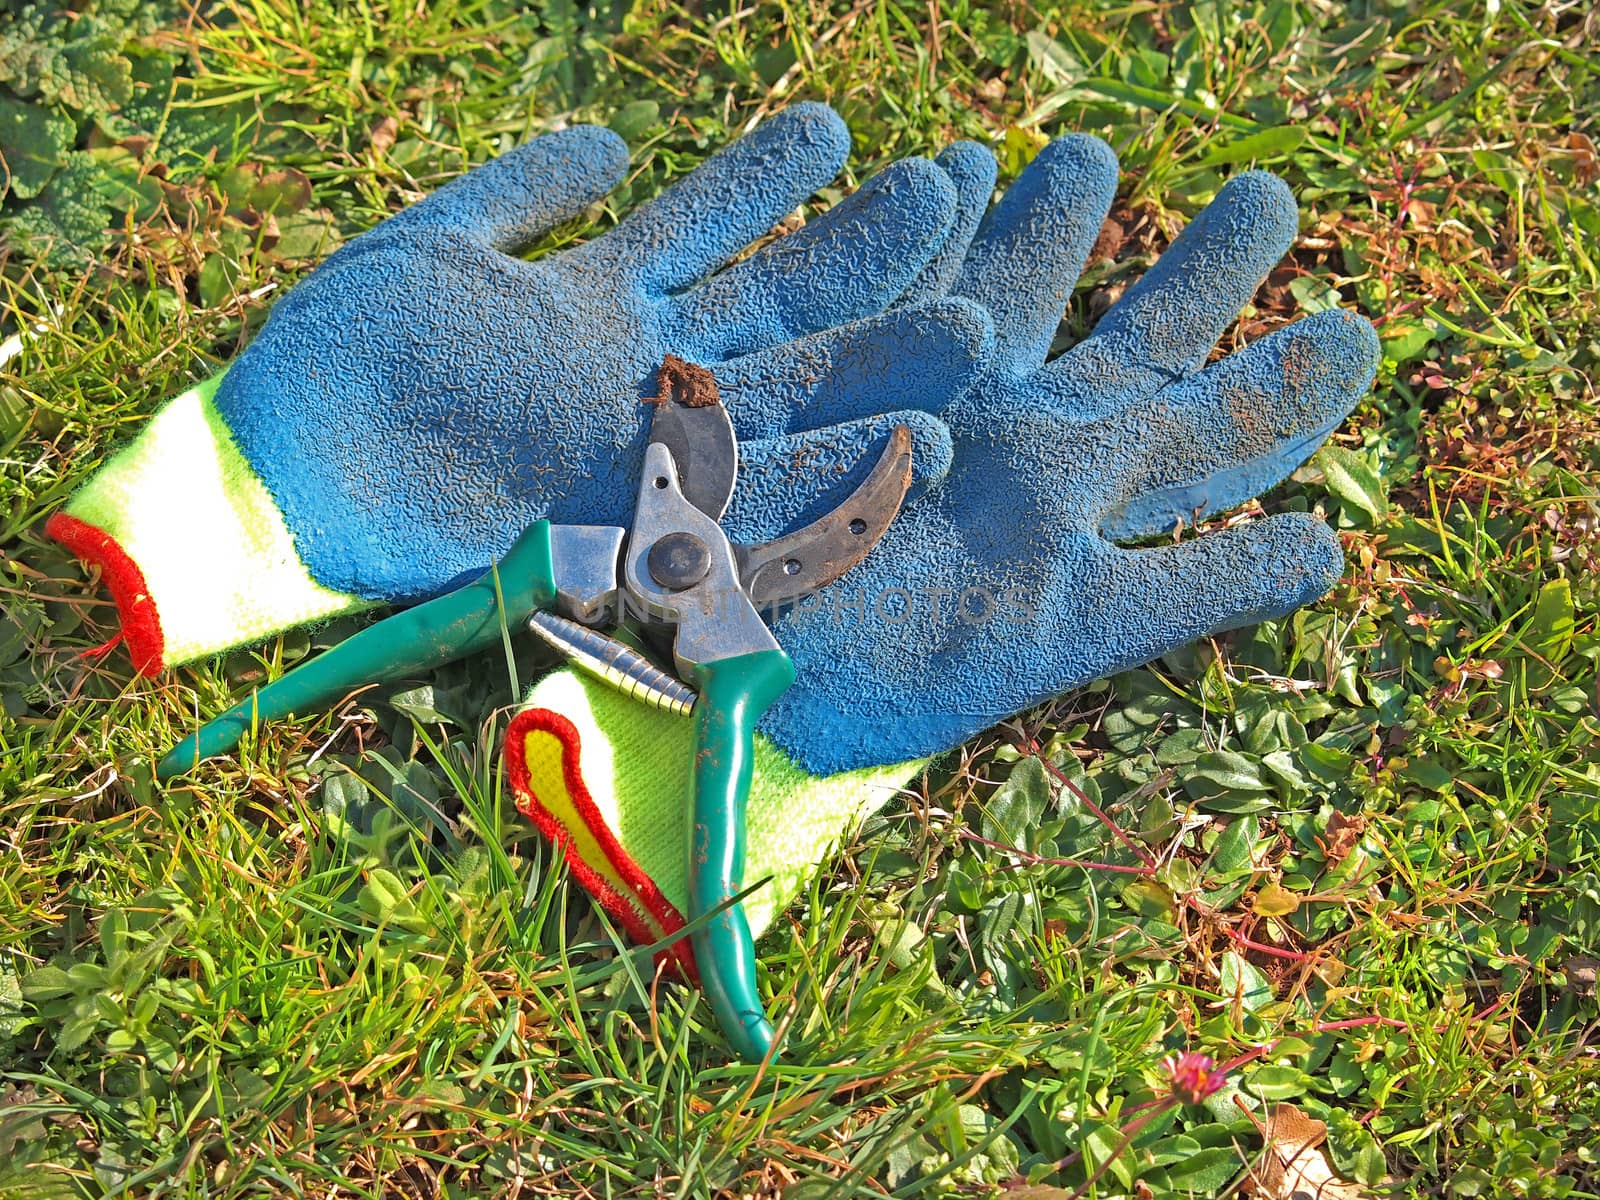 pruning scissors and gloves in the grass        